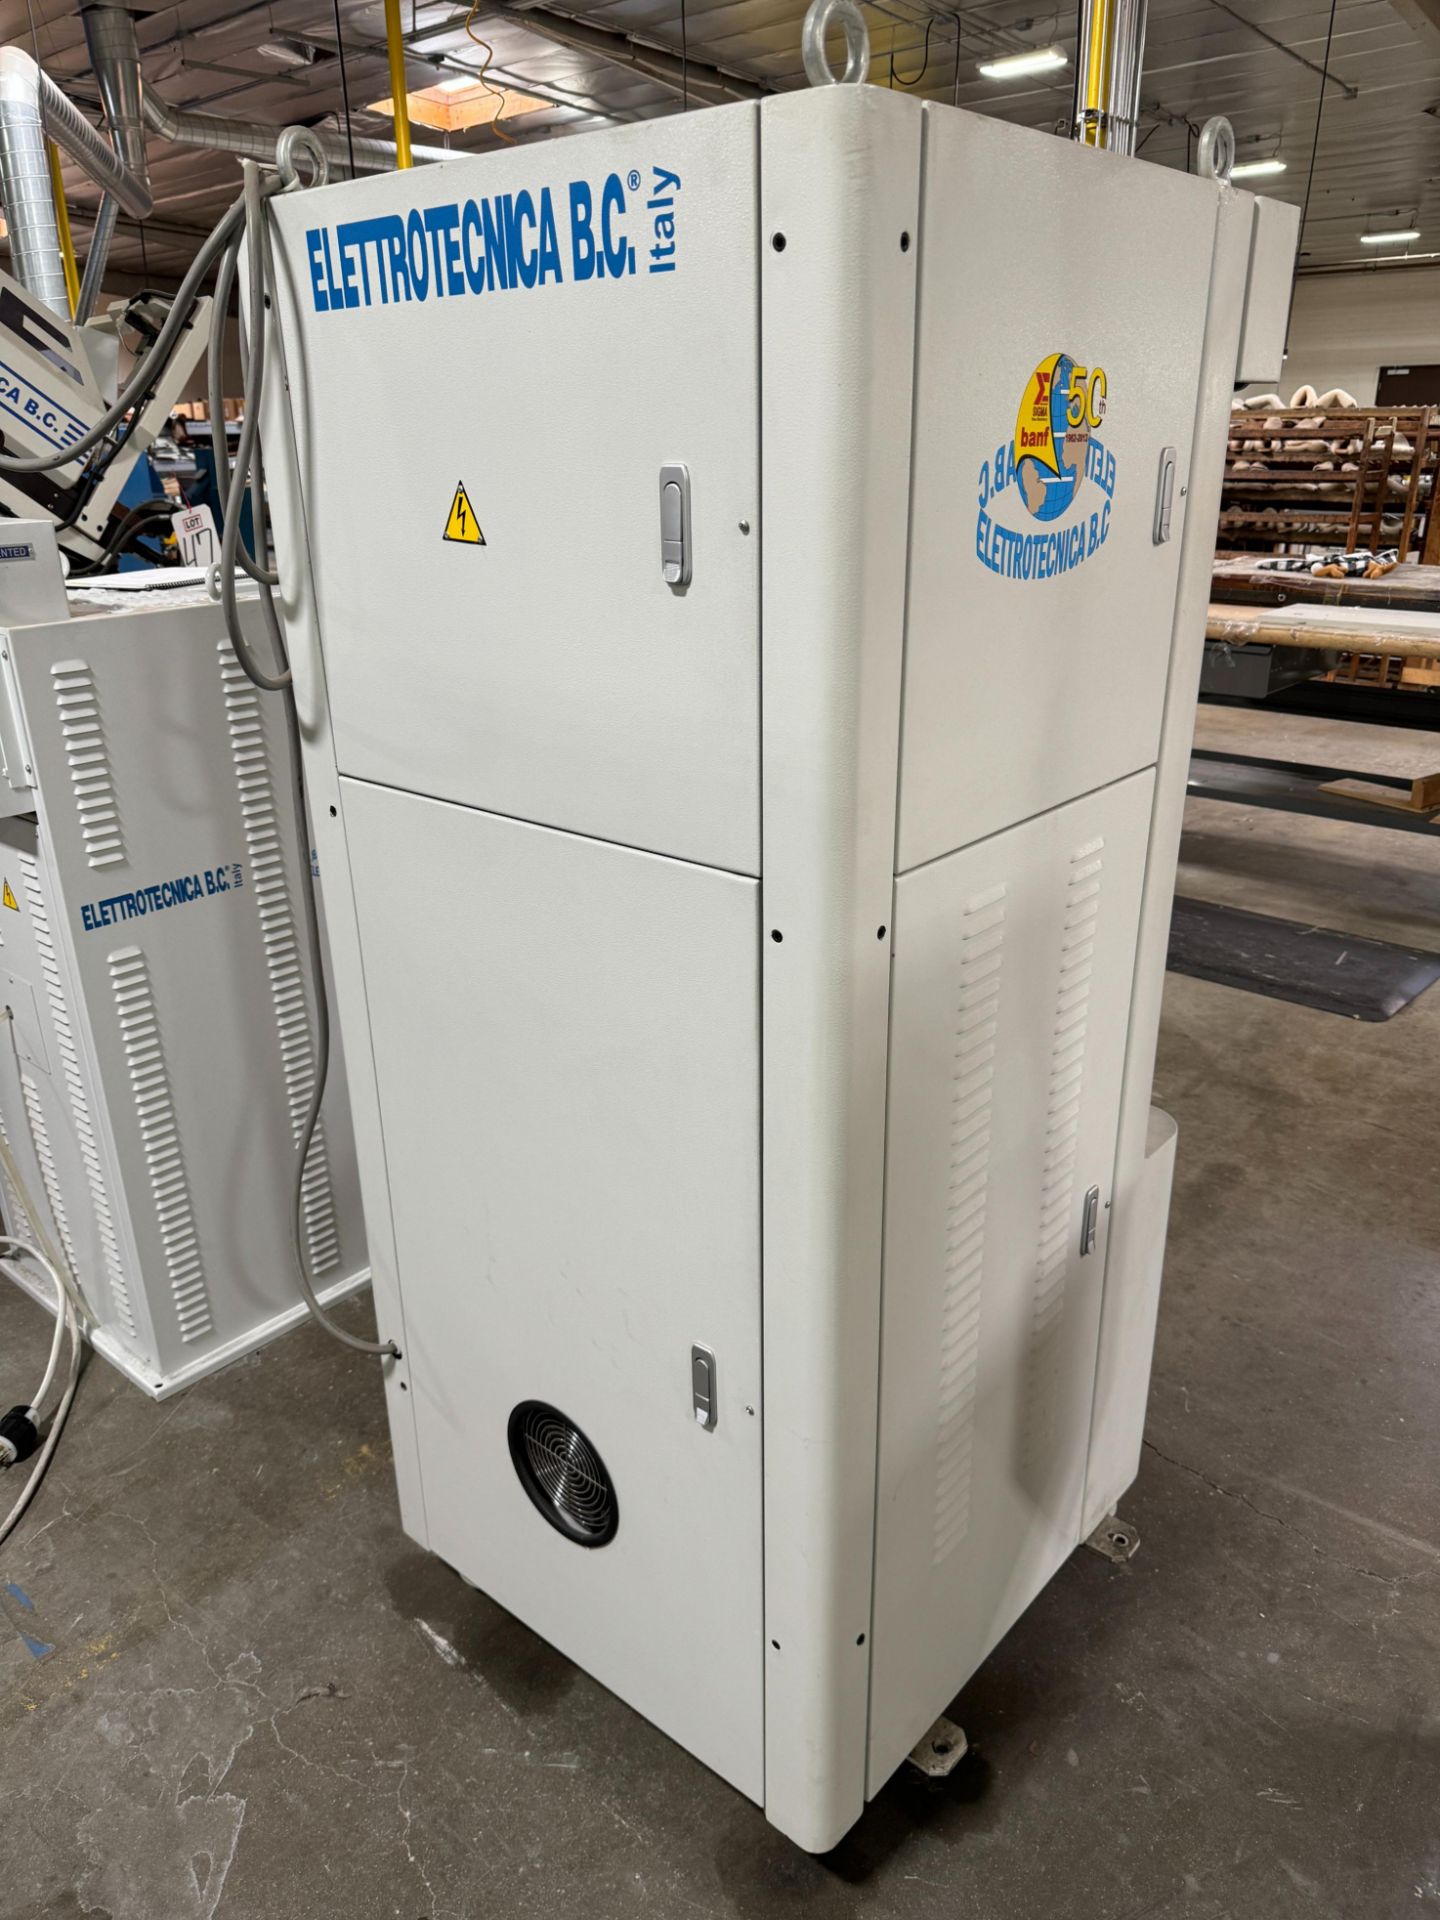 2019 ELETTROTECNICA B.C. HEEL LASTING MACHINE W/ AUTO GLUE AND PROGRAMMABLE PINCERS, MODEL 680 TI - Image 8 of 9